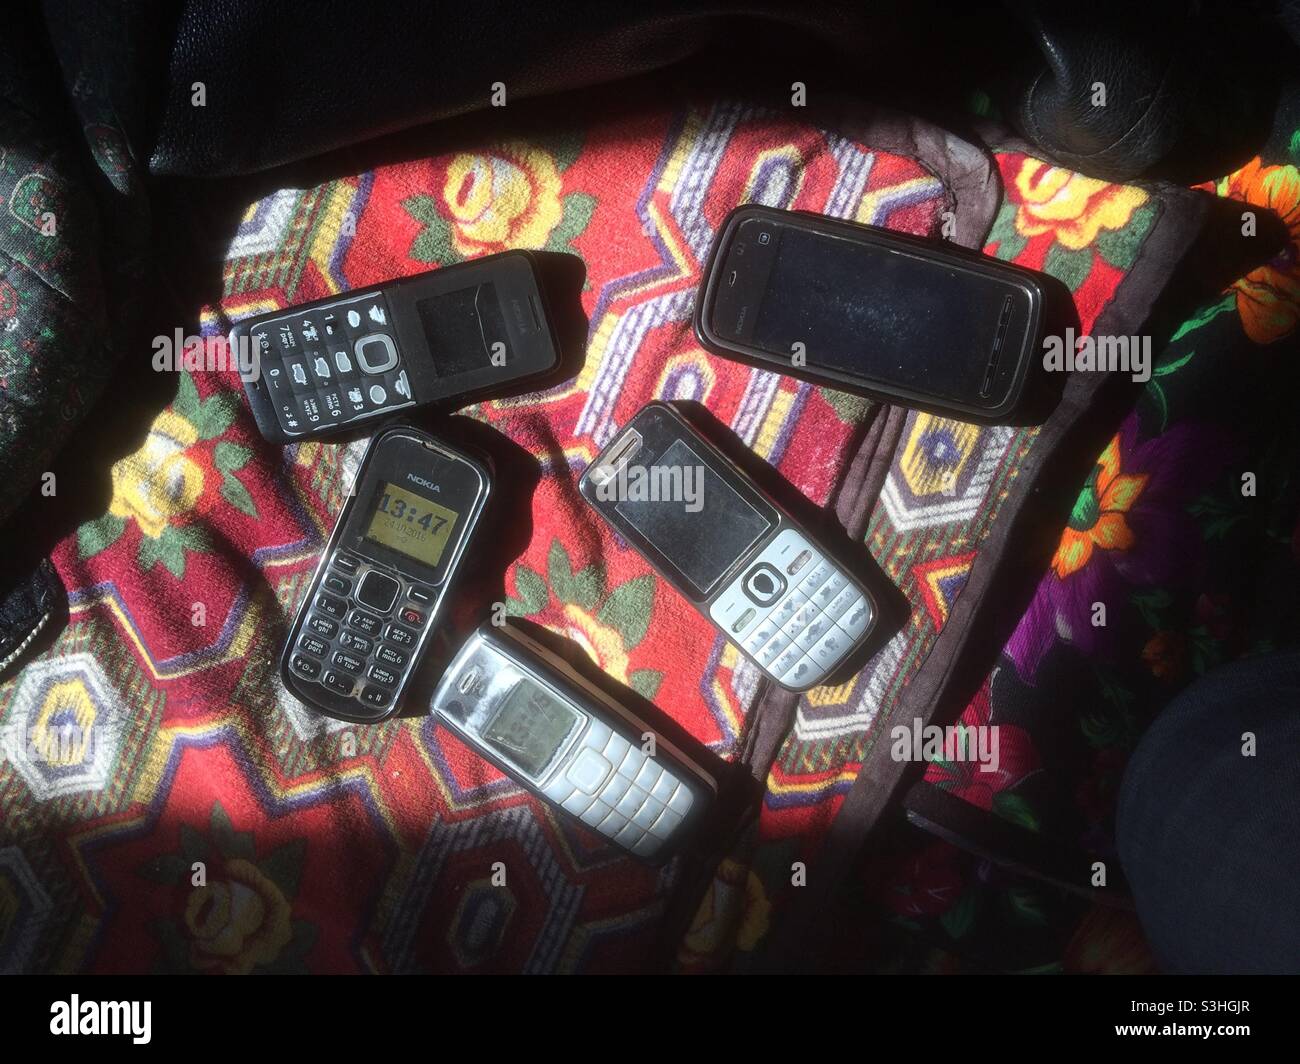 Nokia phones that become history Stock Photo